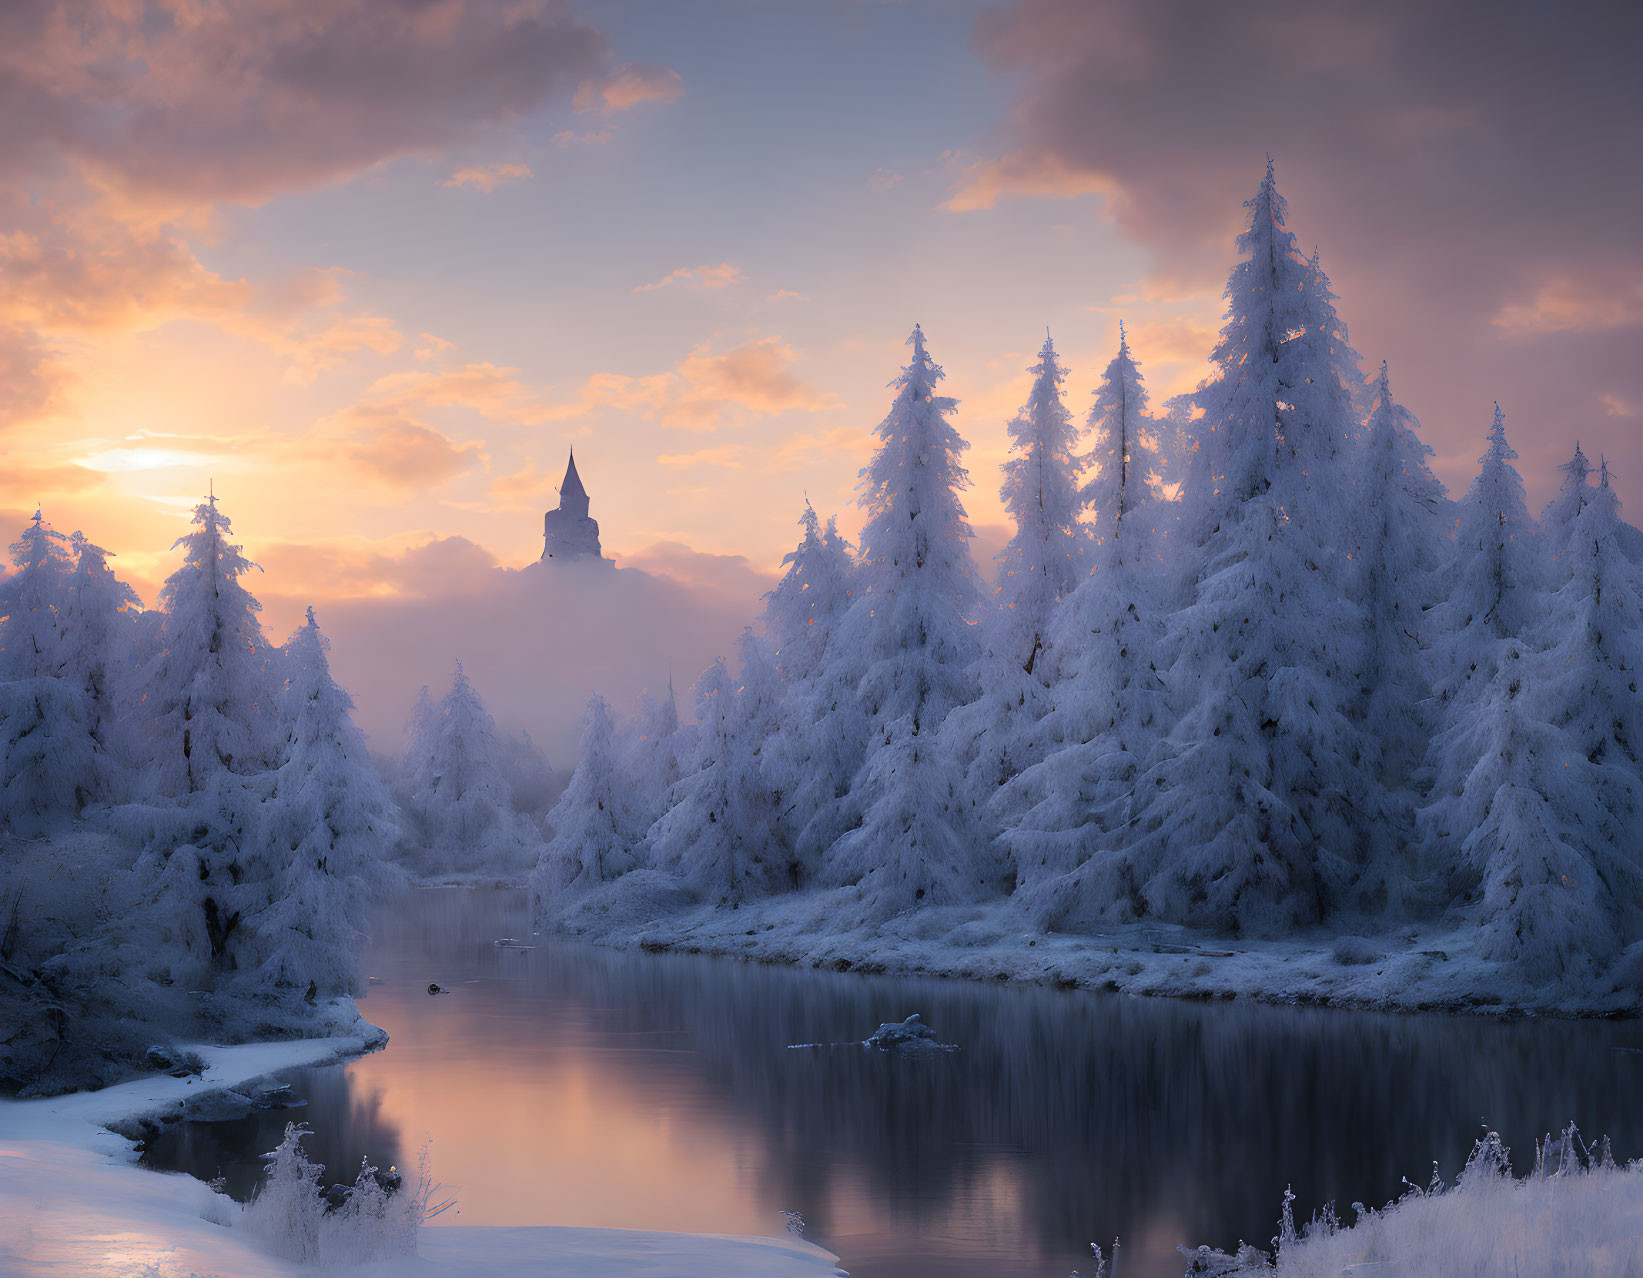 Snow-covered trees, calm river, sunrise, distant tower in tranquil winter scene